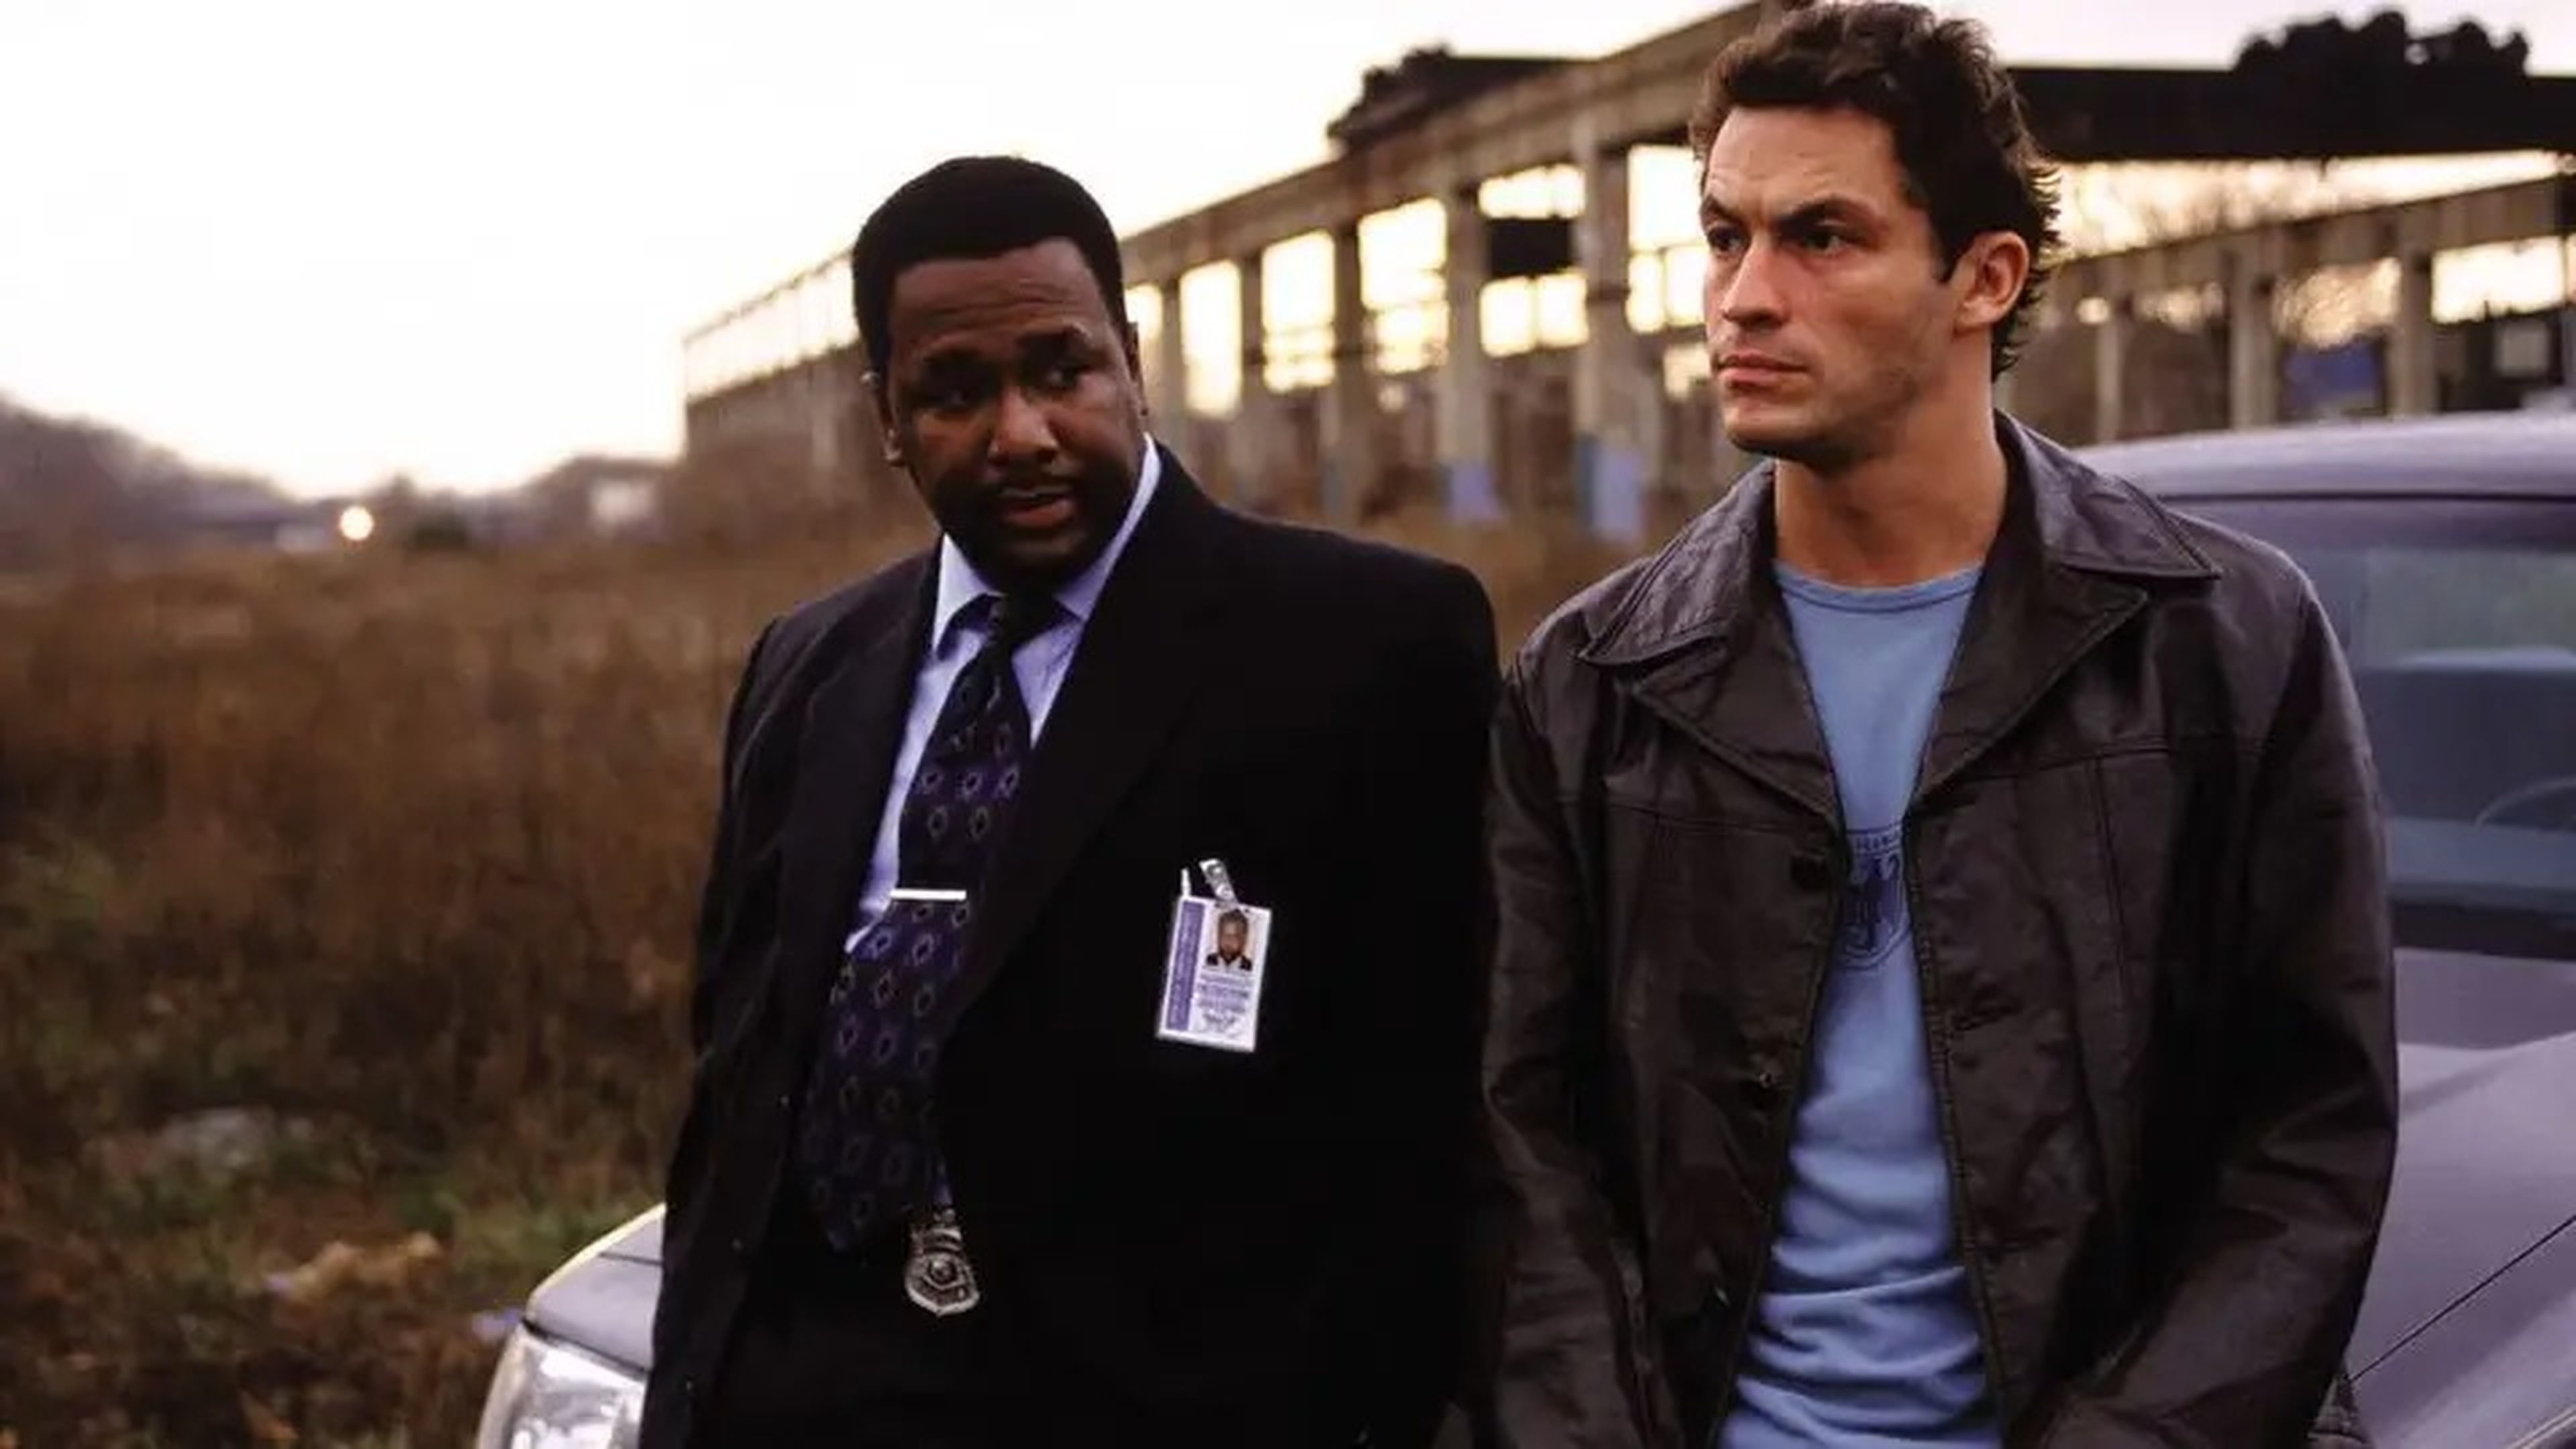 'The Wire'.